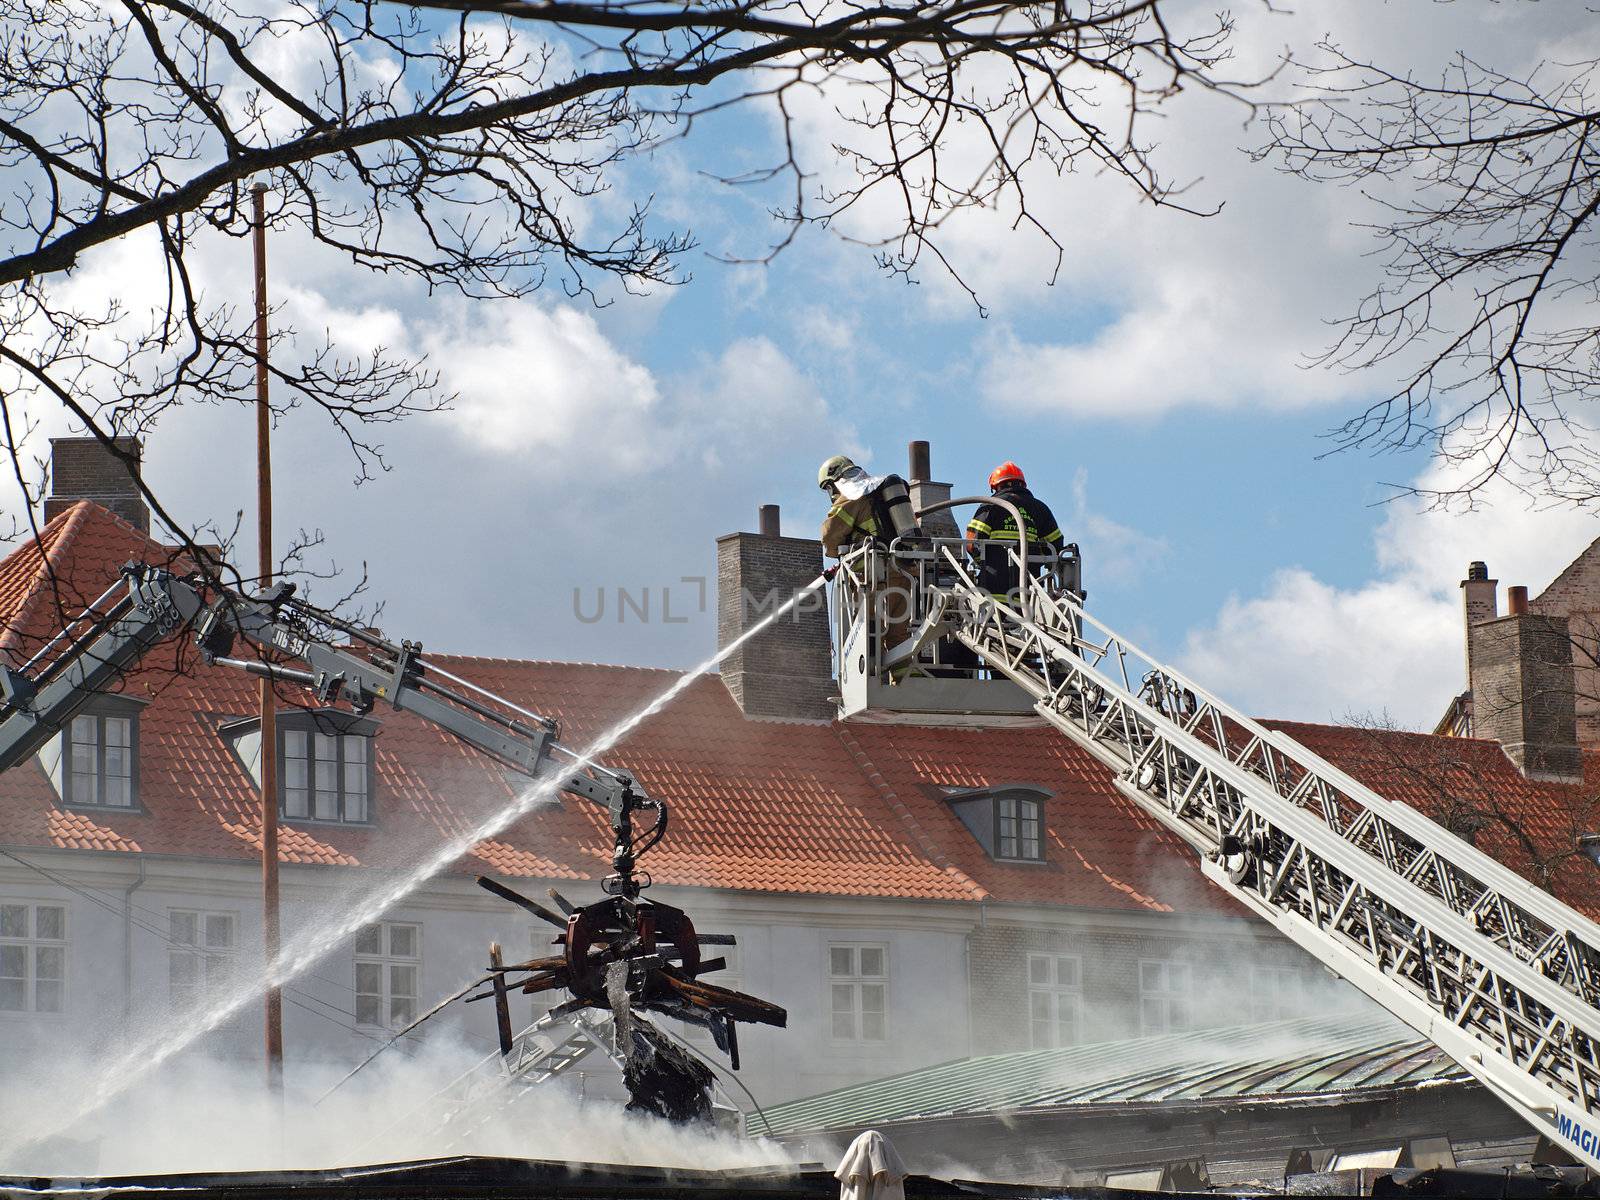 COPENHAGEN - APR 28: Firemen controls fire at The Museum of Danish Resistance 1940 -1945 on April 28, 2013 in Copenhagen, Denmark. It took 10 hours to put off the fire which started at 1:45 A.M.